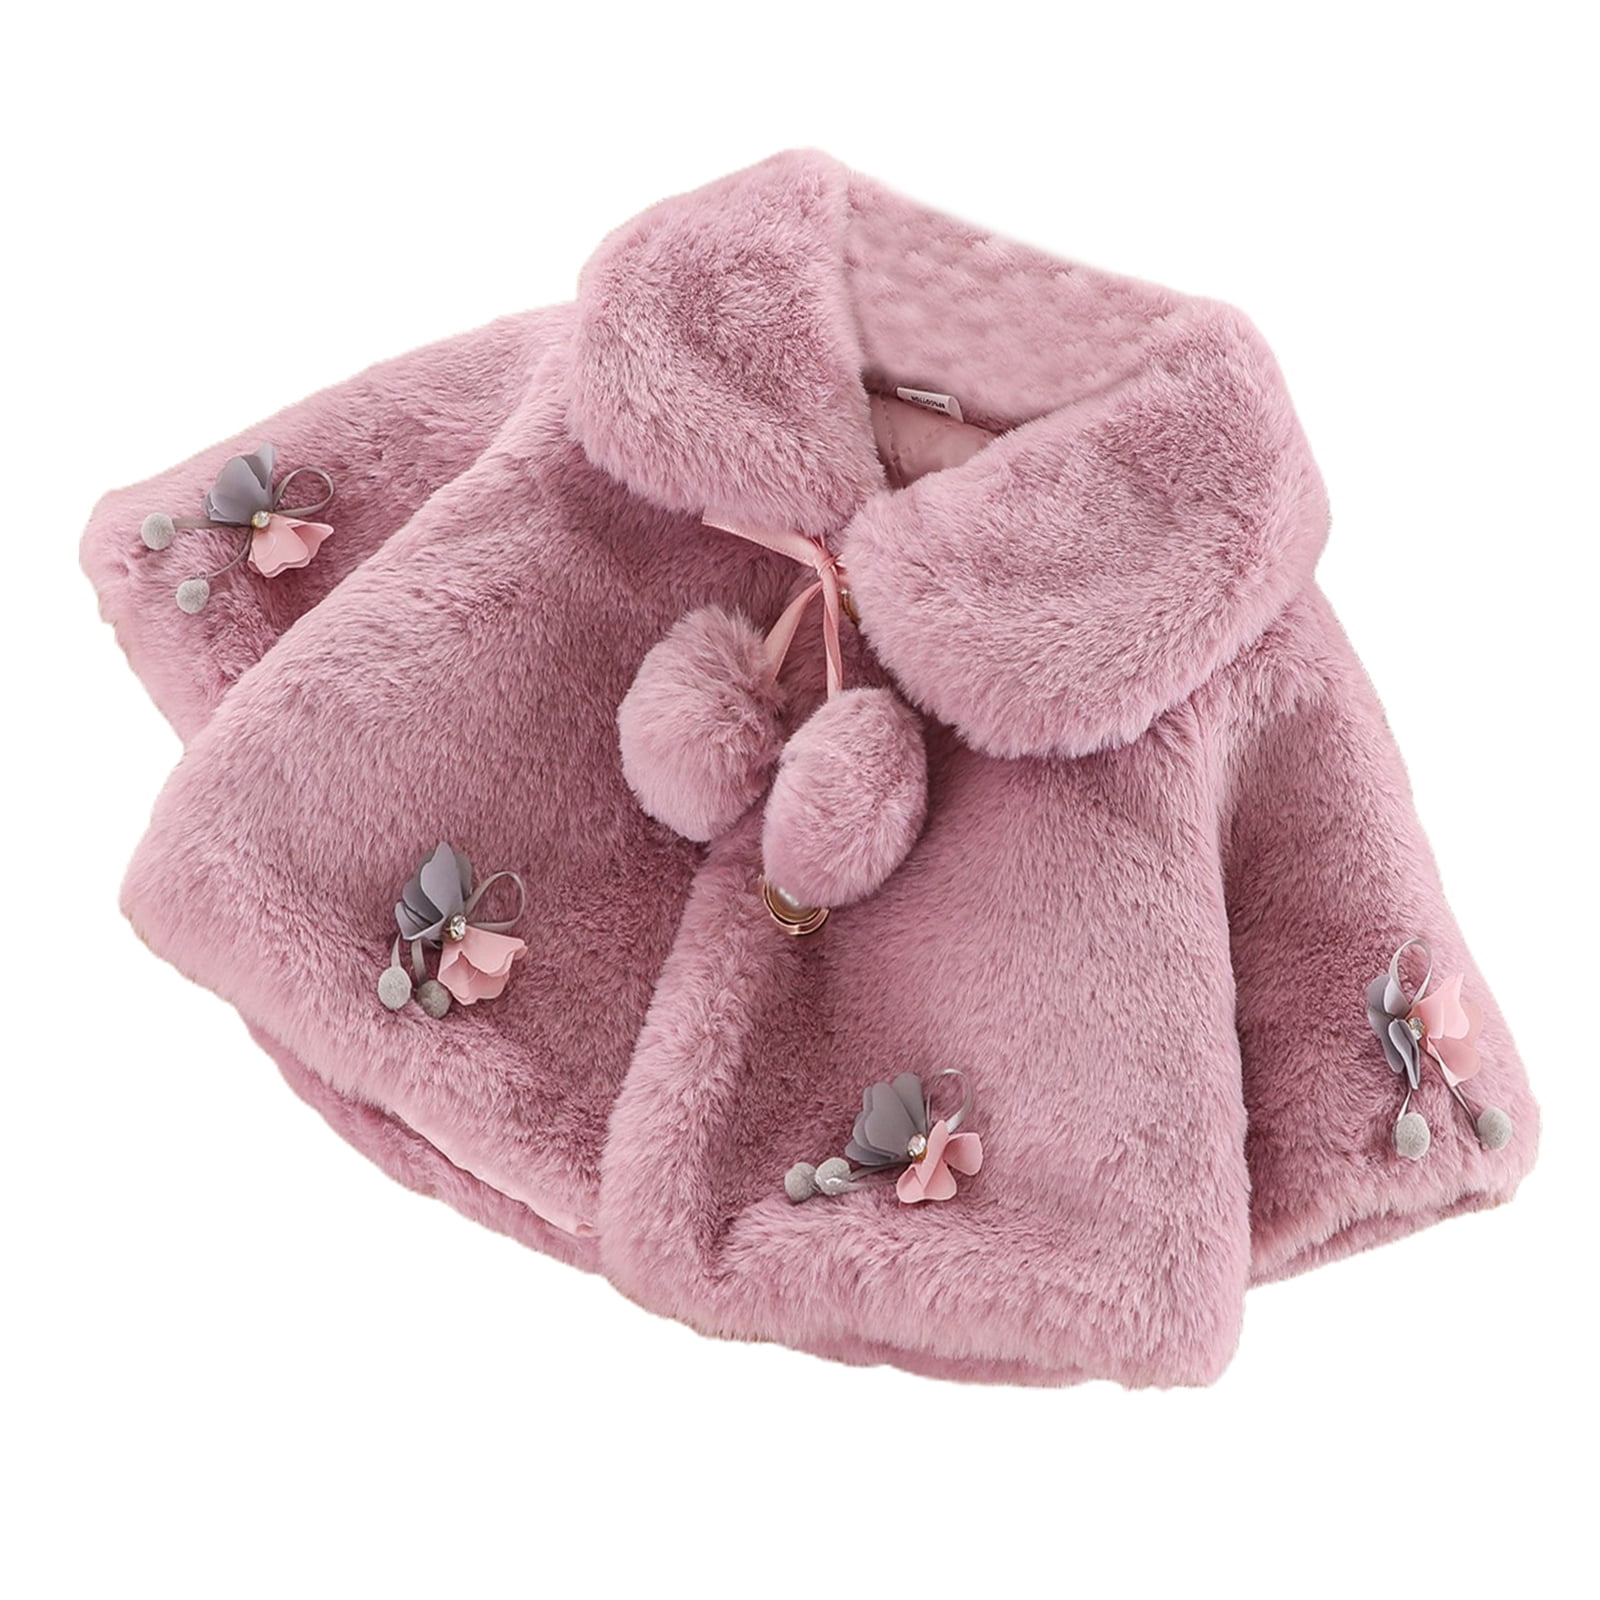 Infant Toddler Baby Girls Cute Winter Warm Thick Fur Capes Cardigan Cloak Coat with Bow Pom-Pom Balls 